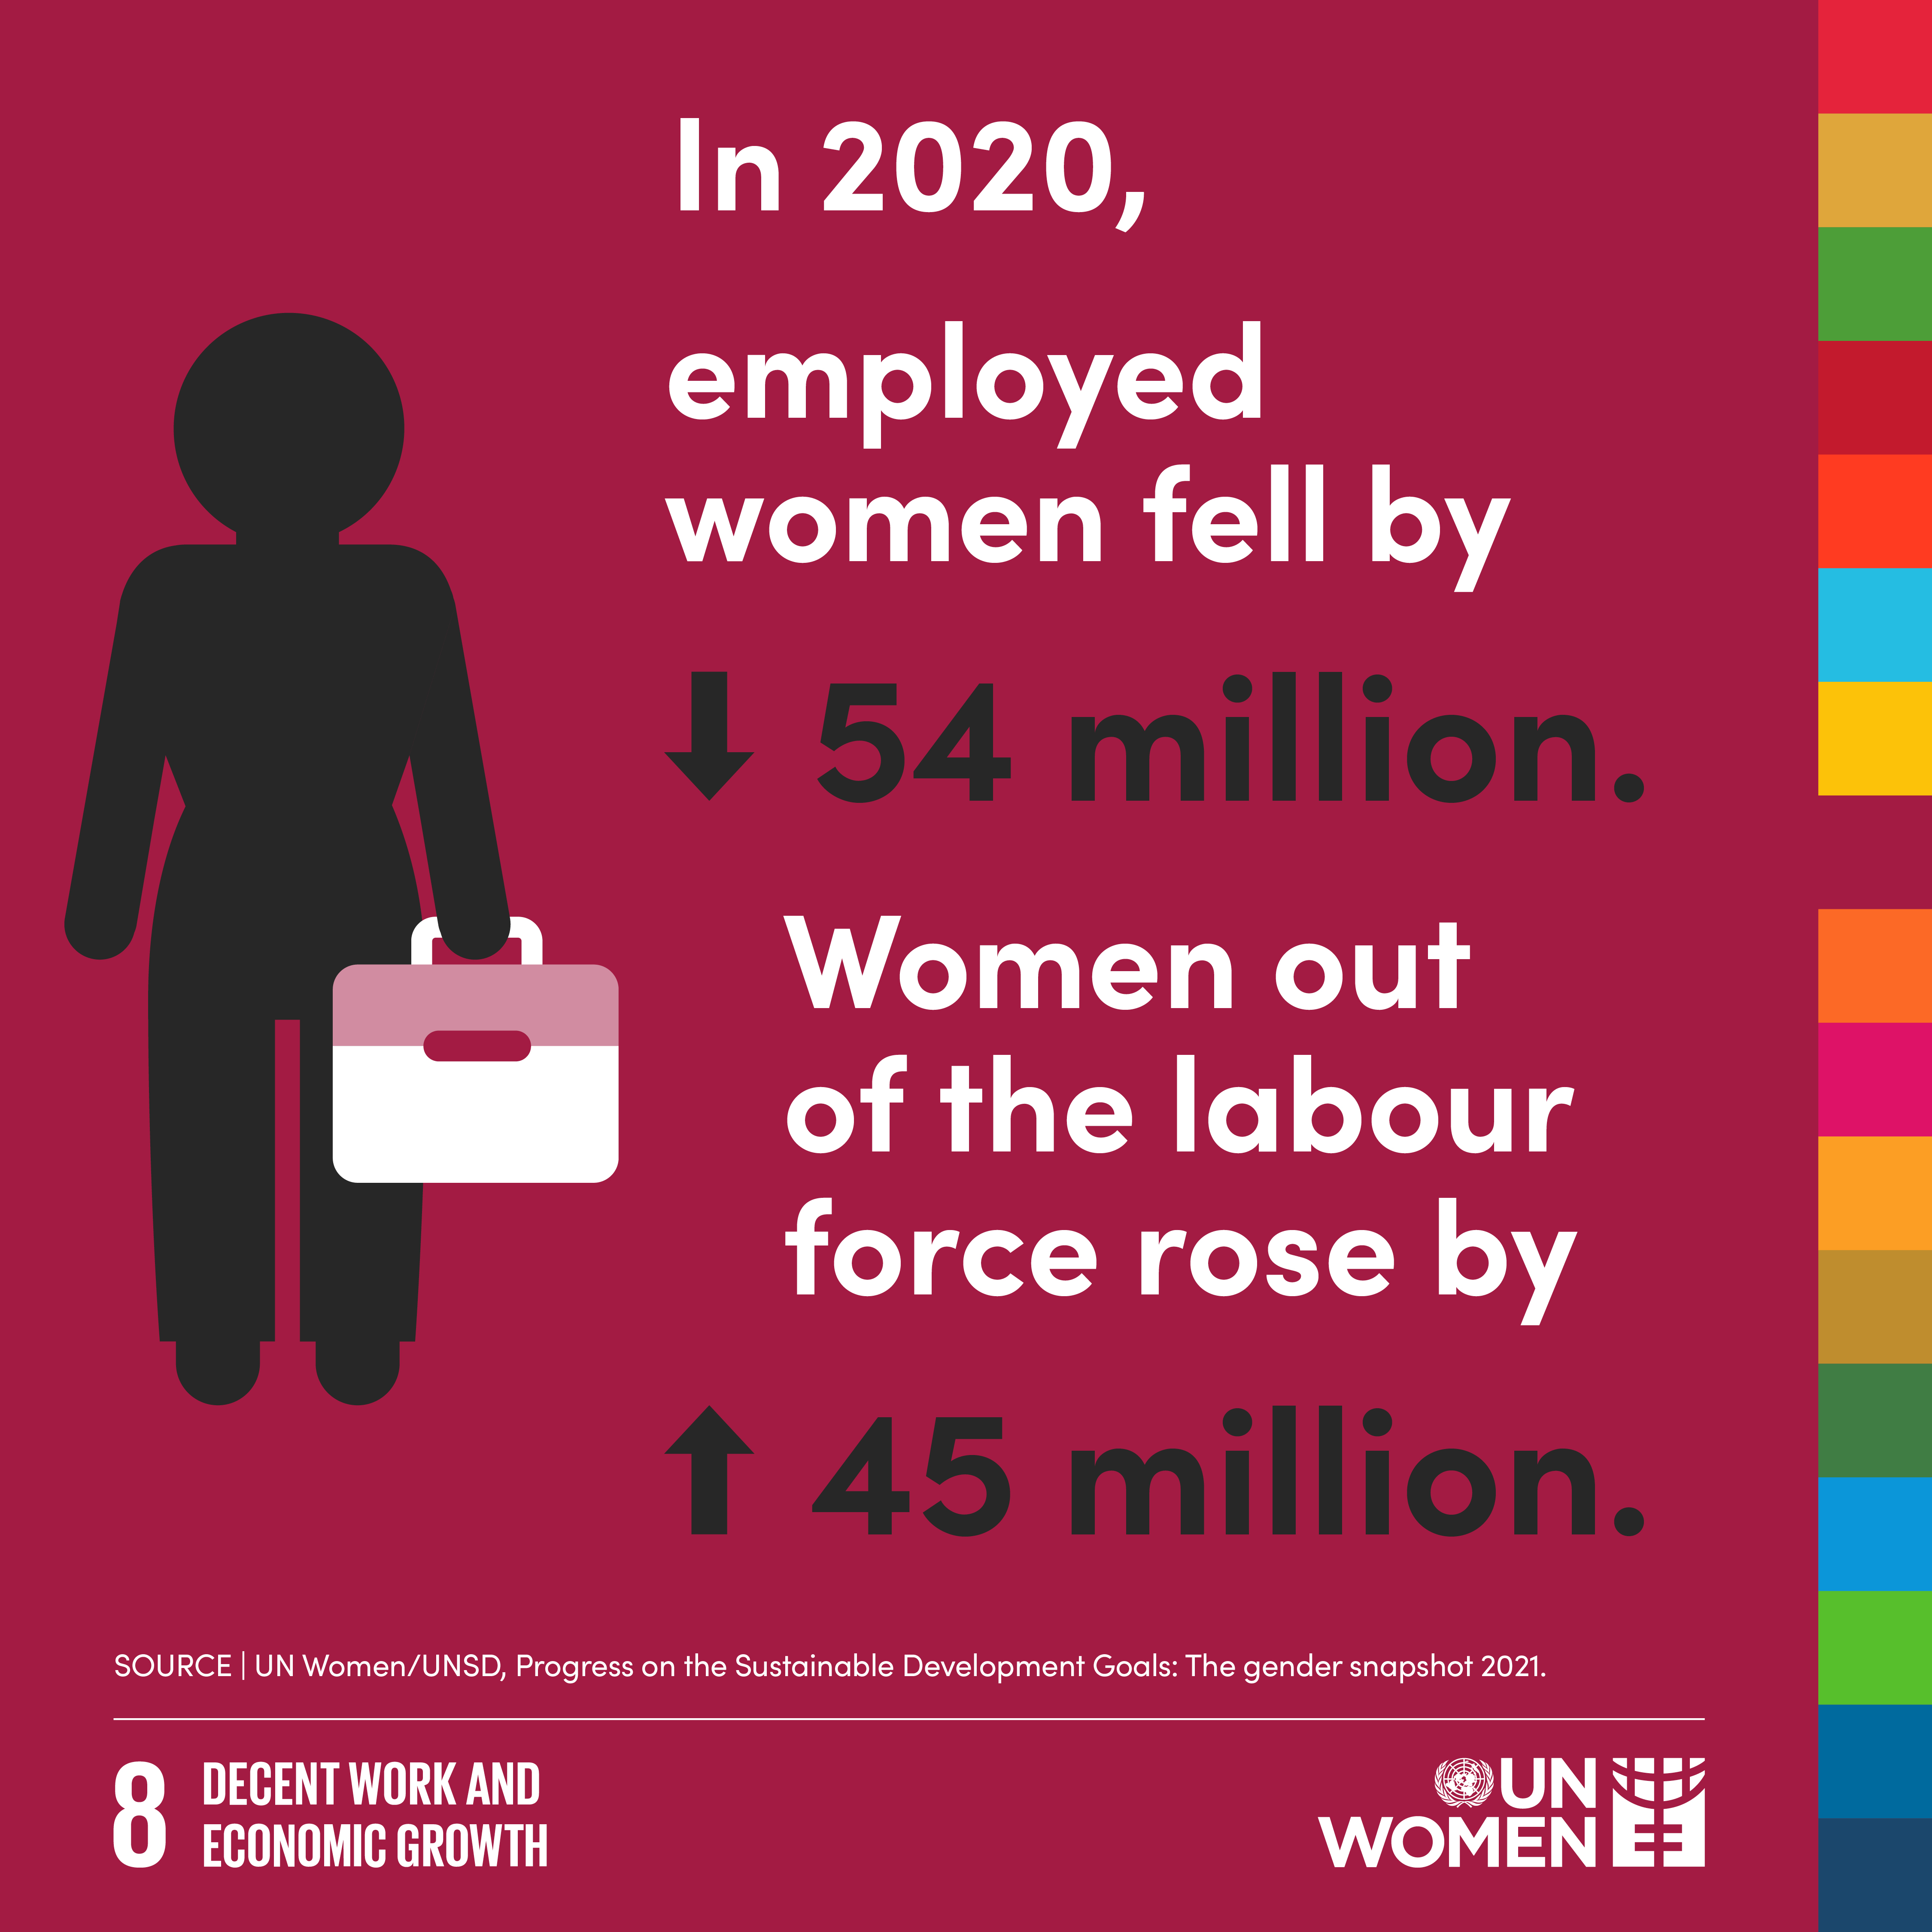 In 2020 employed women fell by 54 million. Women out of the labour force rose by 45 million.